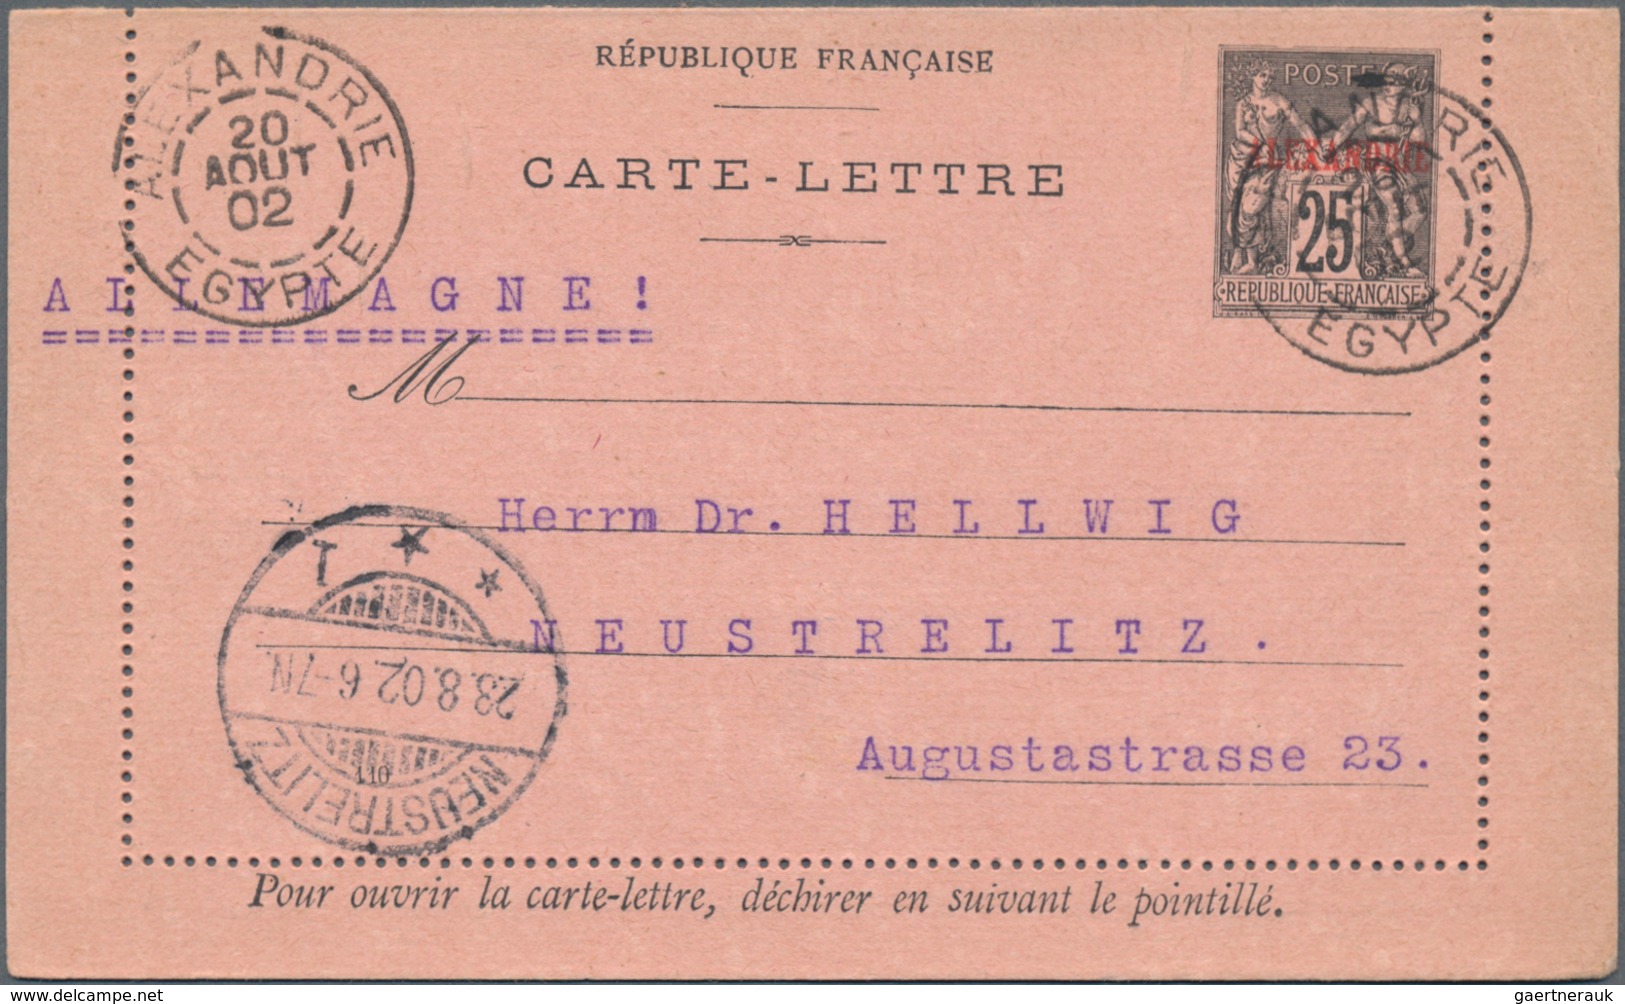 Frankreich: 1860/2010, holding of ca. 450 letters, cards, precursor cards, picture-postcards, intern